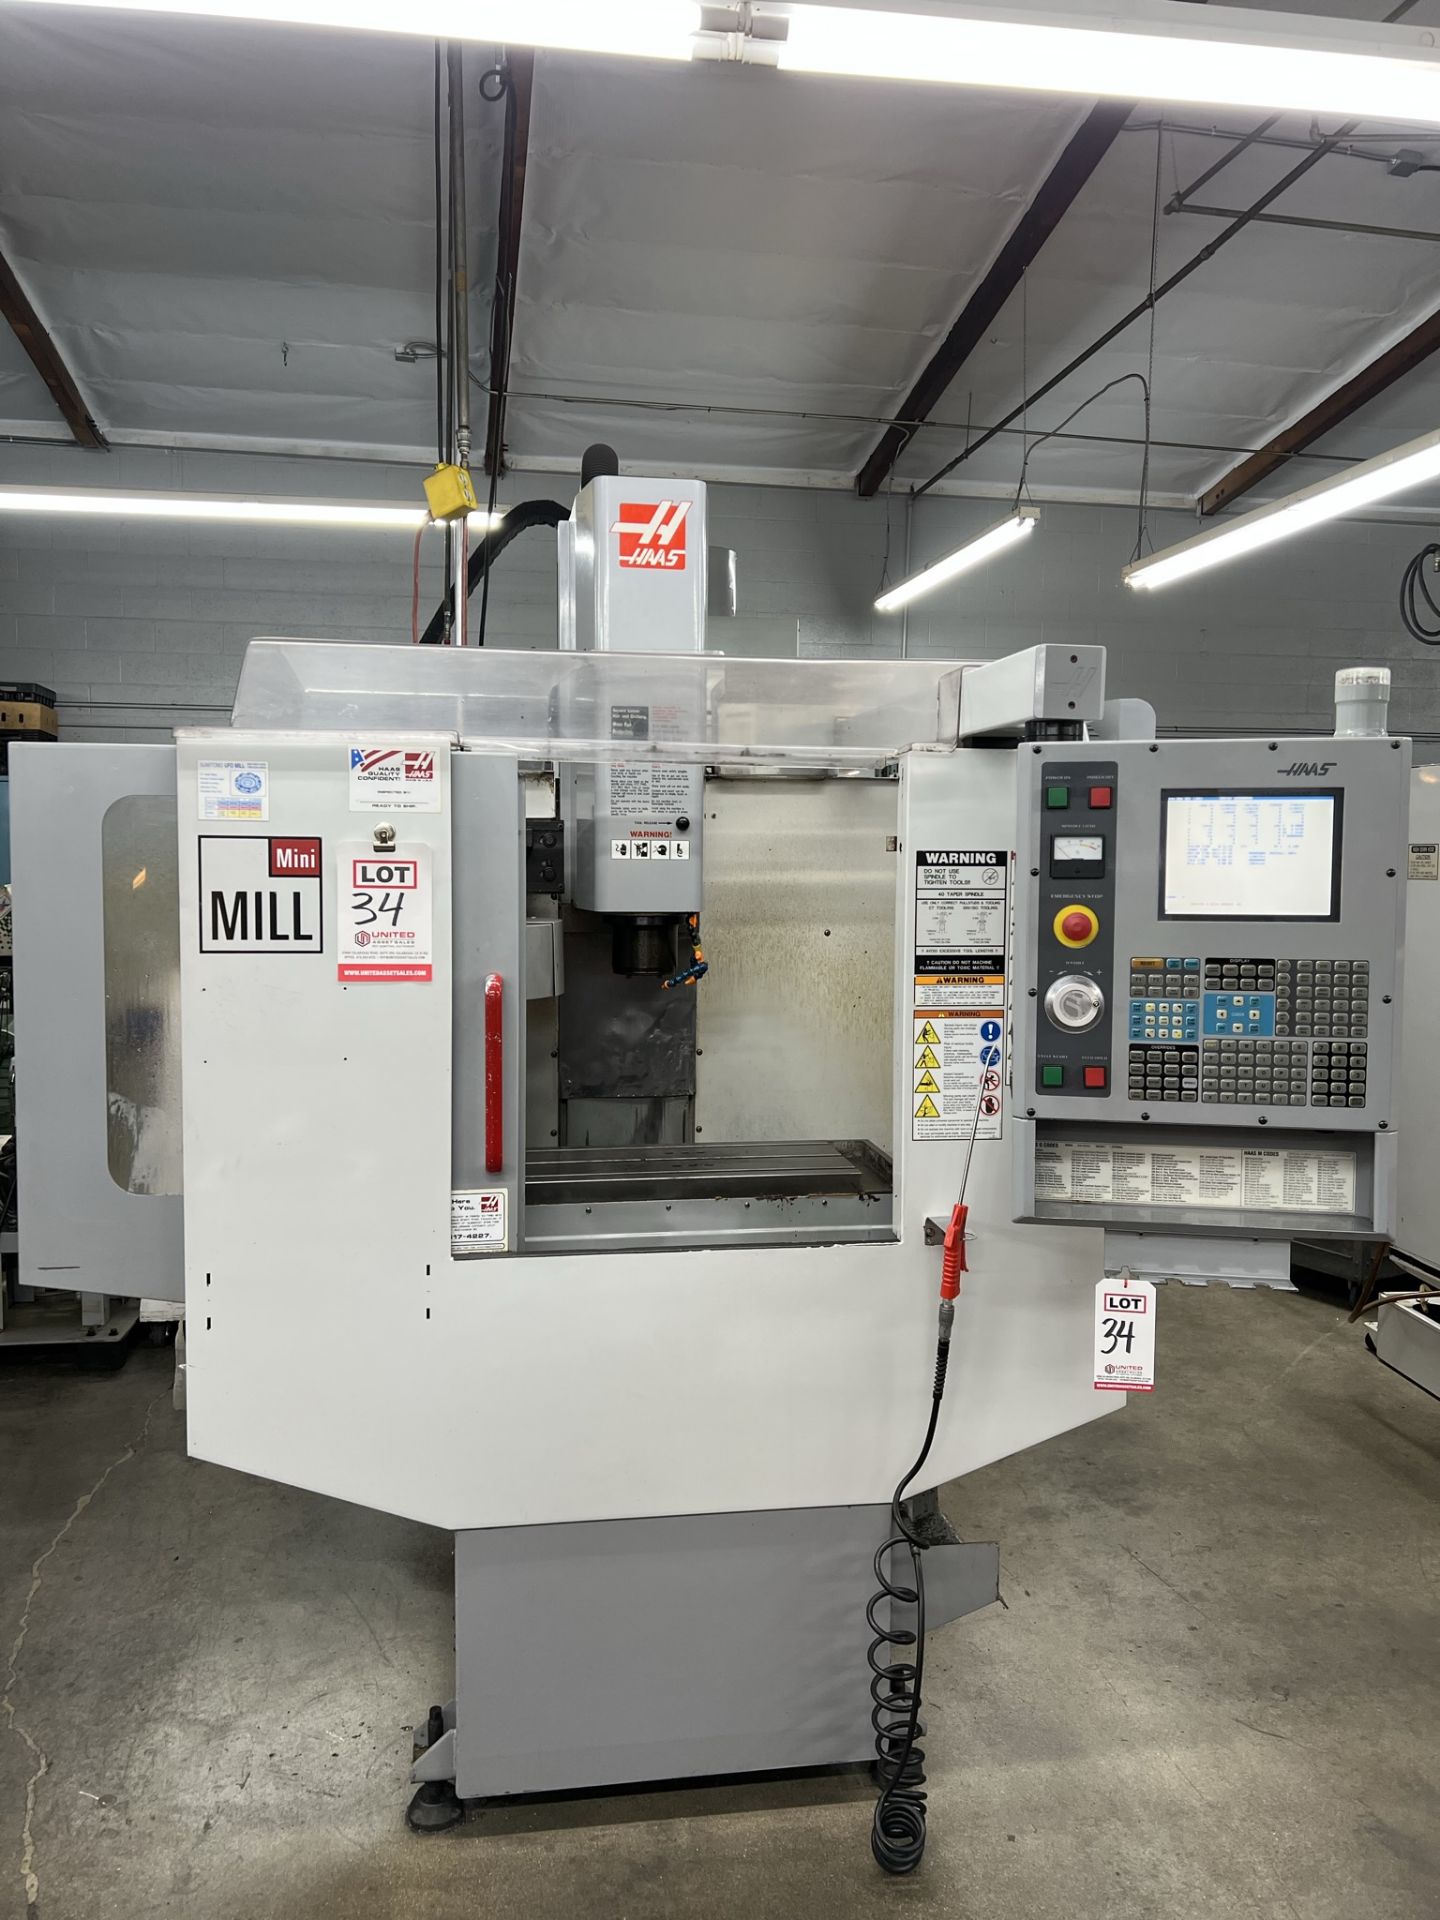 2005 HAAS MINI MILL CNC VERTICAL MILL, 16" X, 12" Y, 10" Z, 36" X 12" TABLE, 6,000 RPM SPINDLE, 10-